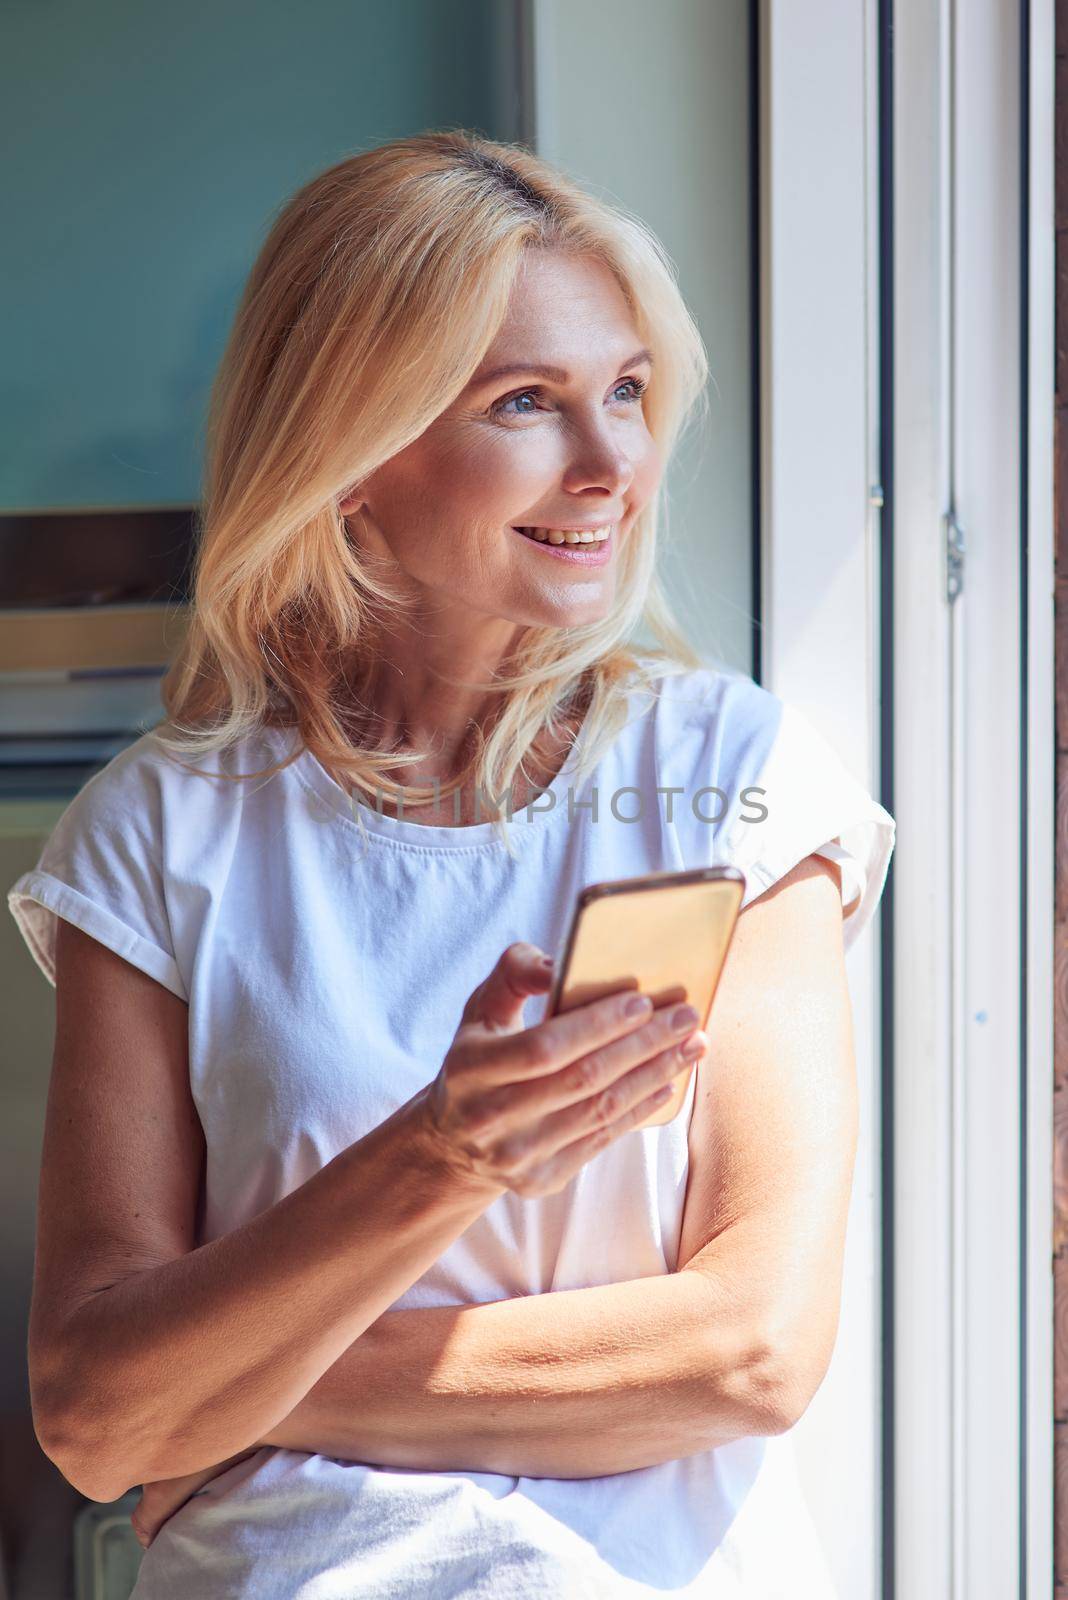 Middle aged caucasian woman holding phone while standing near sunny balcony and looking aside. People at home